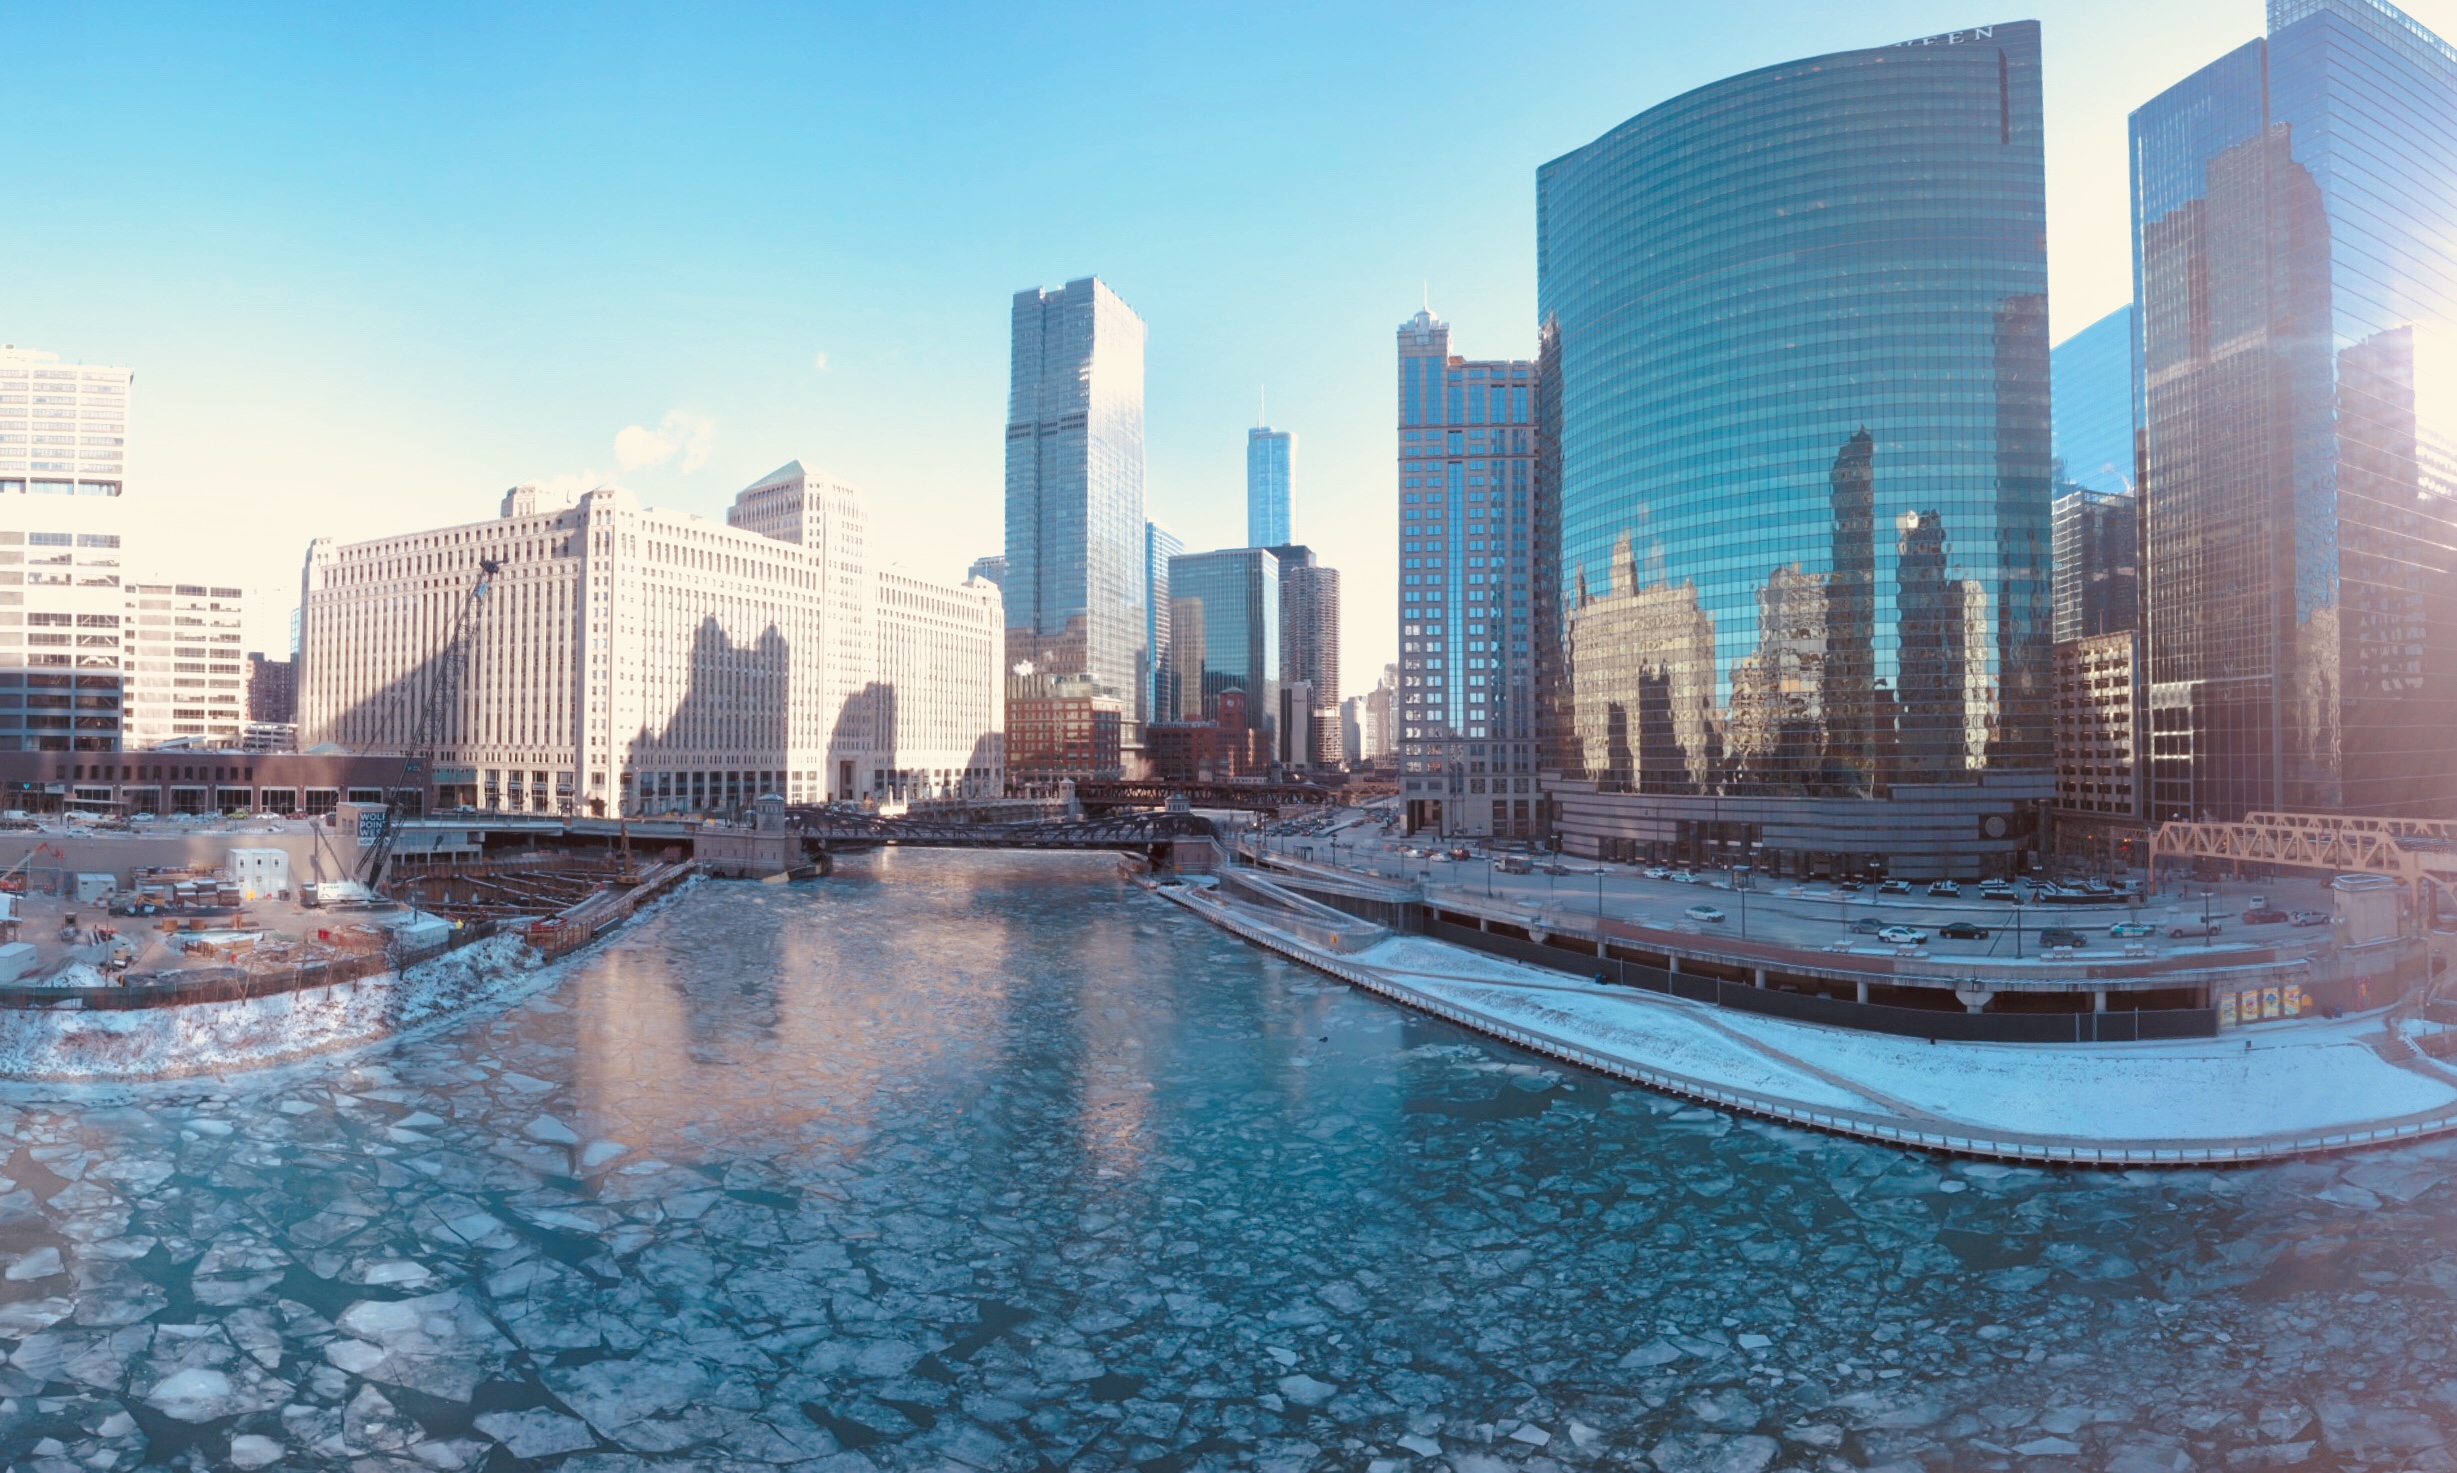 Aerial view of the frozen Chicago River